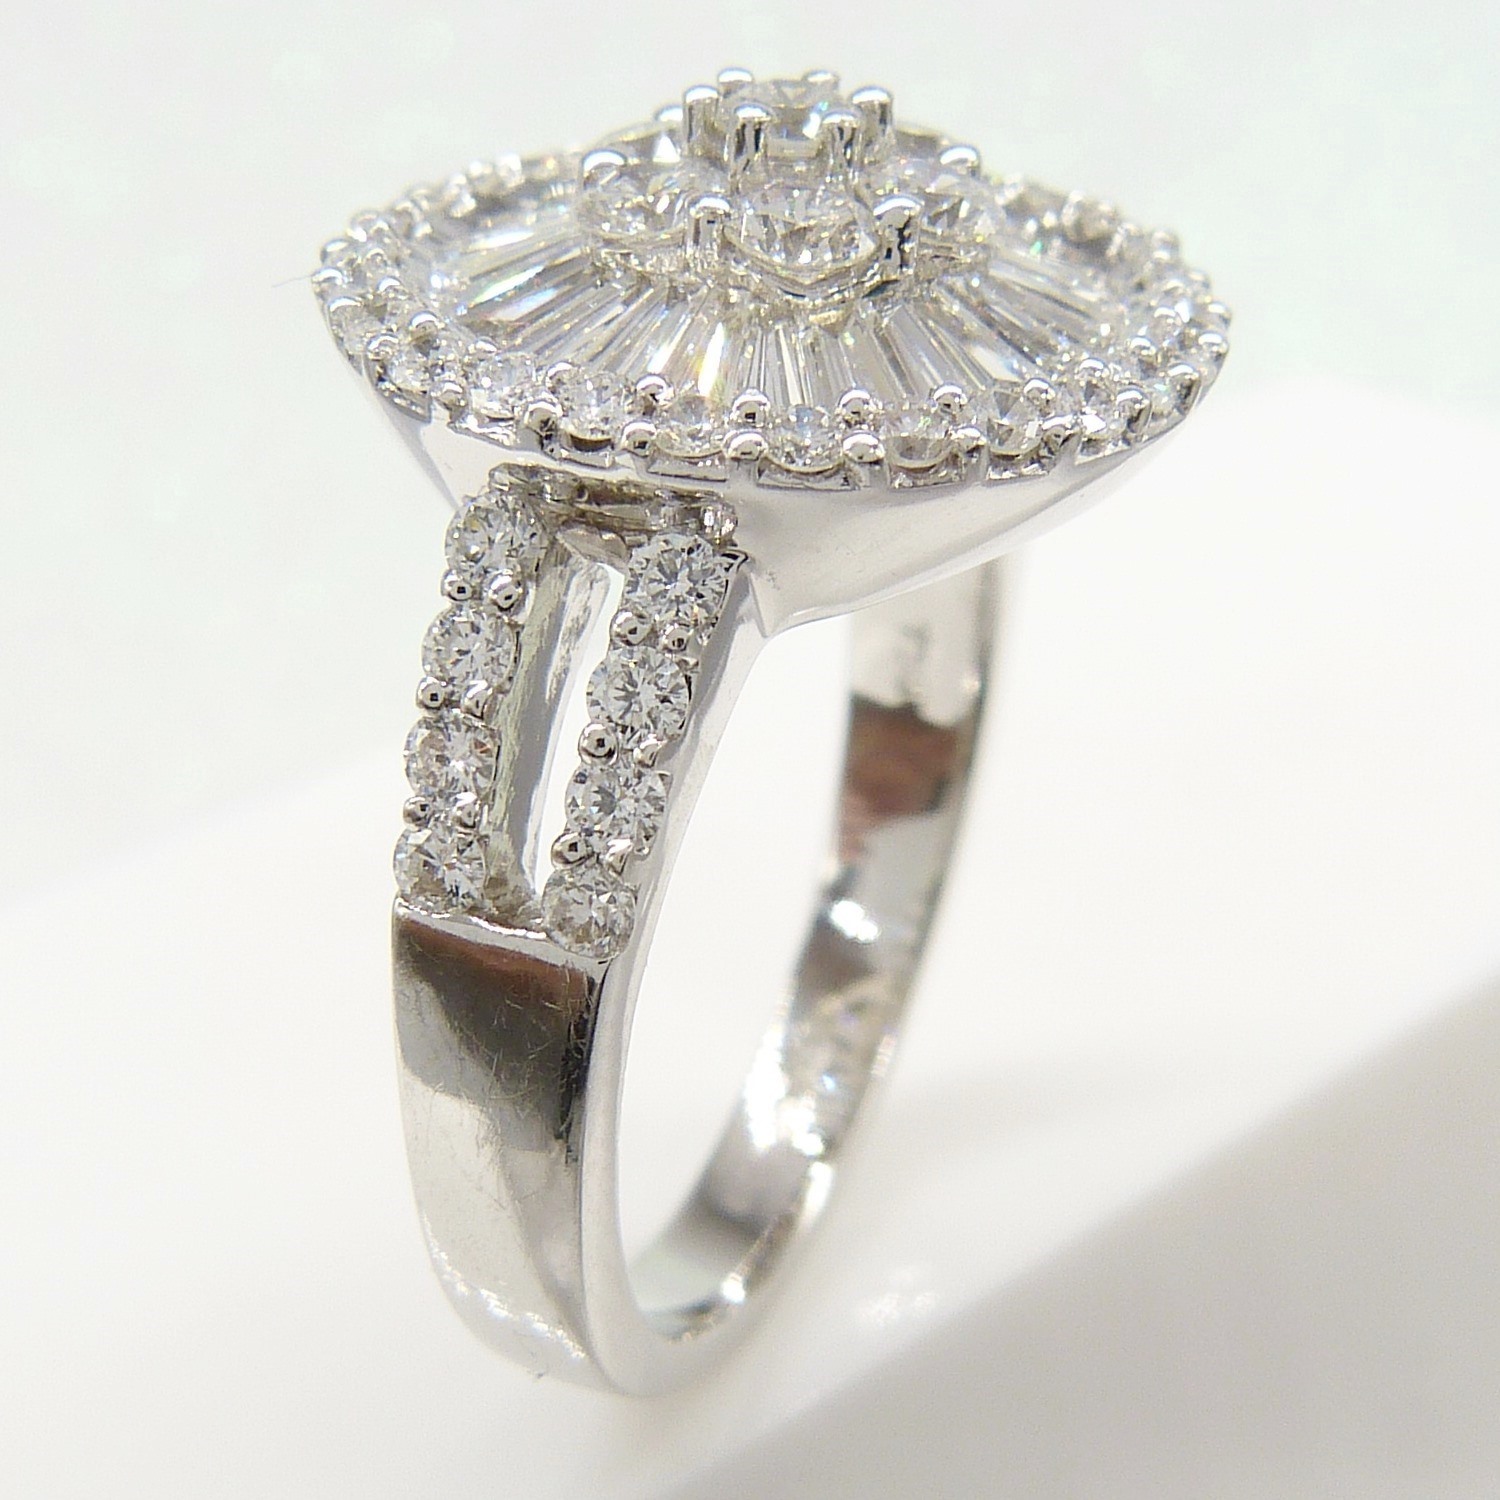 An attractive, certificated, 2.05 carat Diamond cluster ring in 18k white Gold, with Diamond - Image 5 of 10